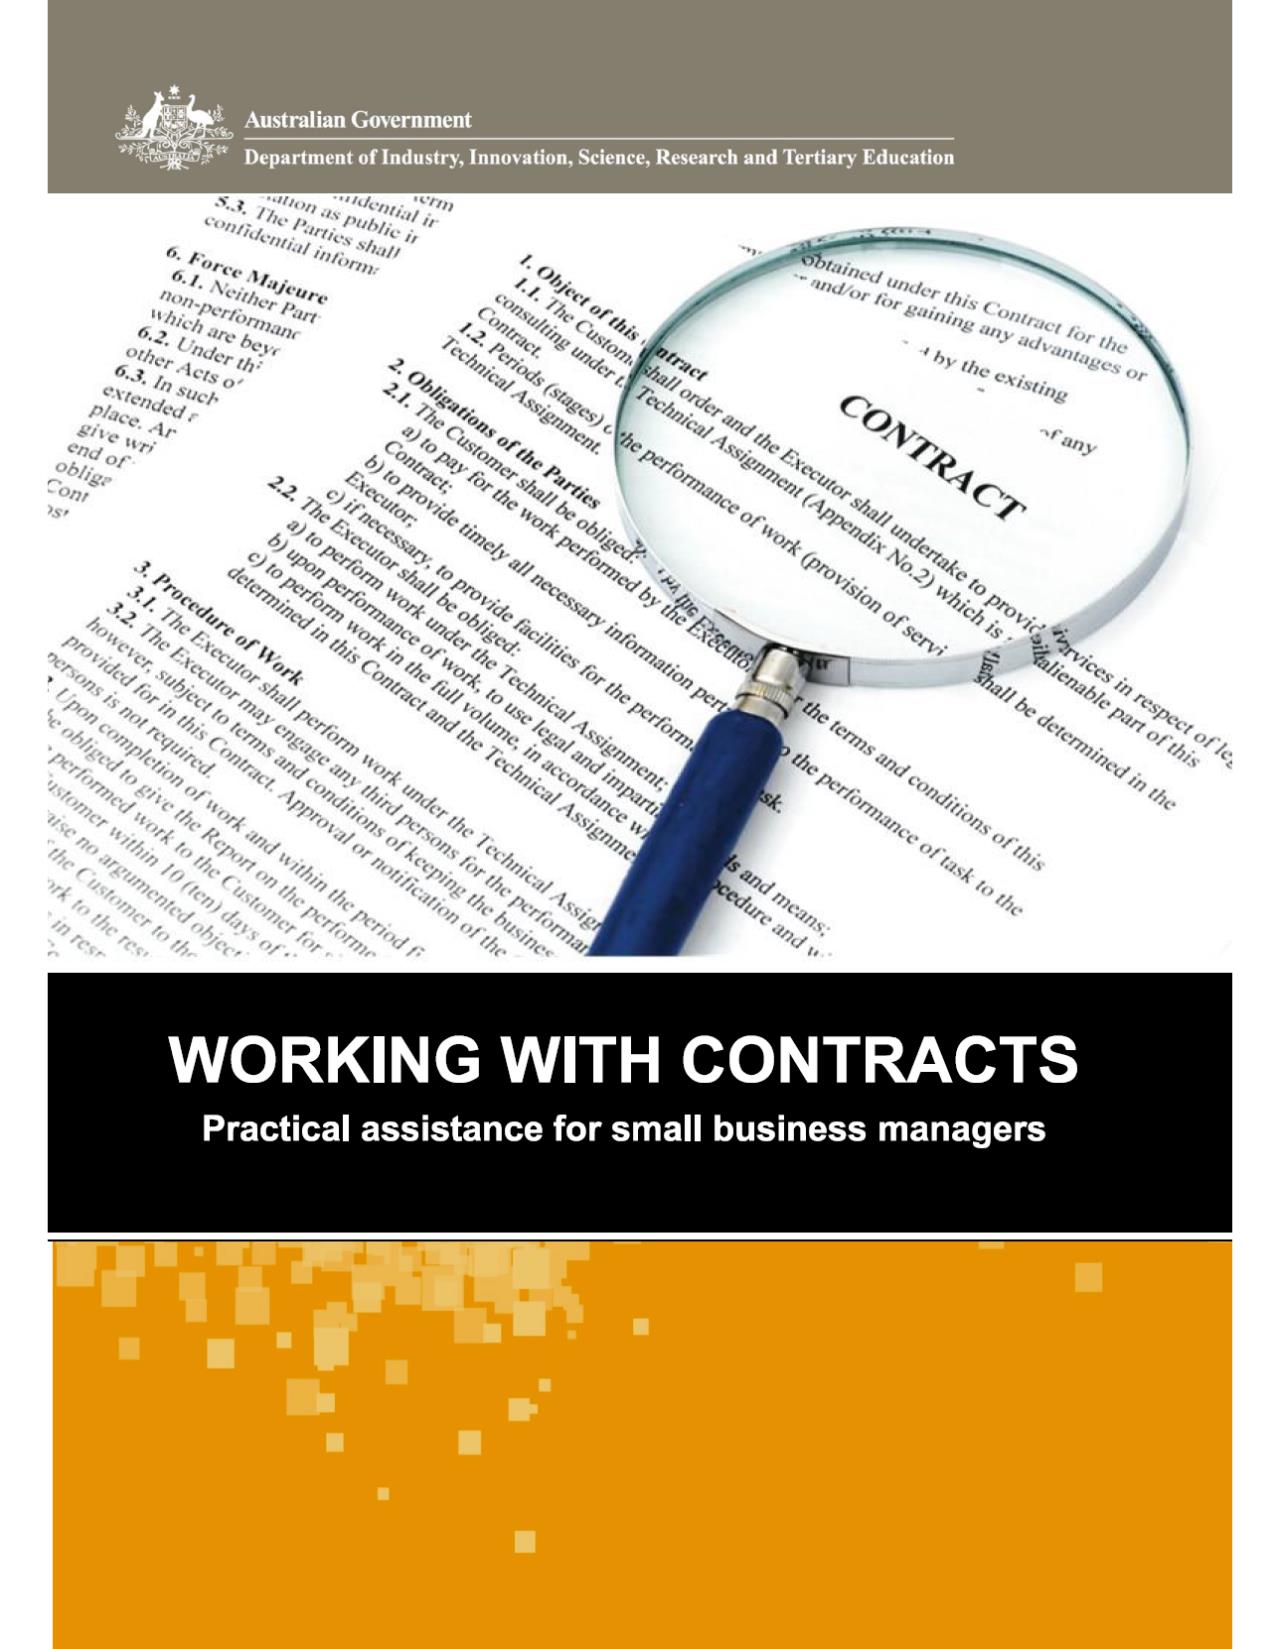 WorkingWithContractsGuideCover.jpg